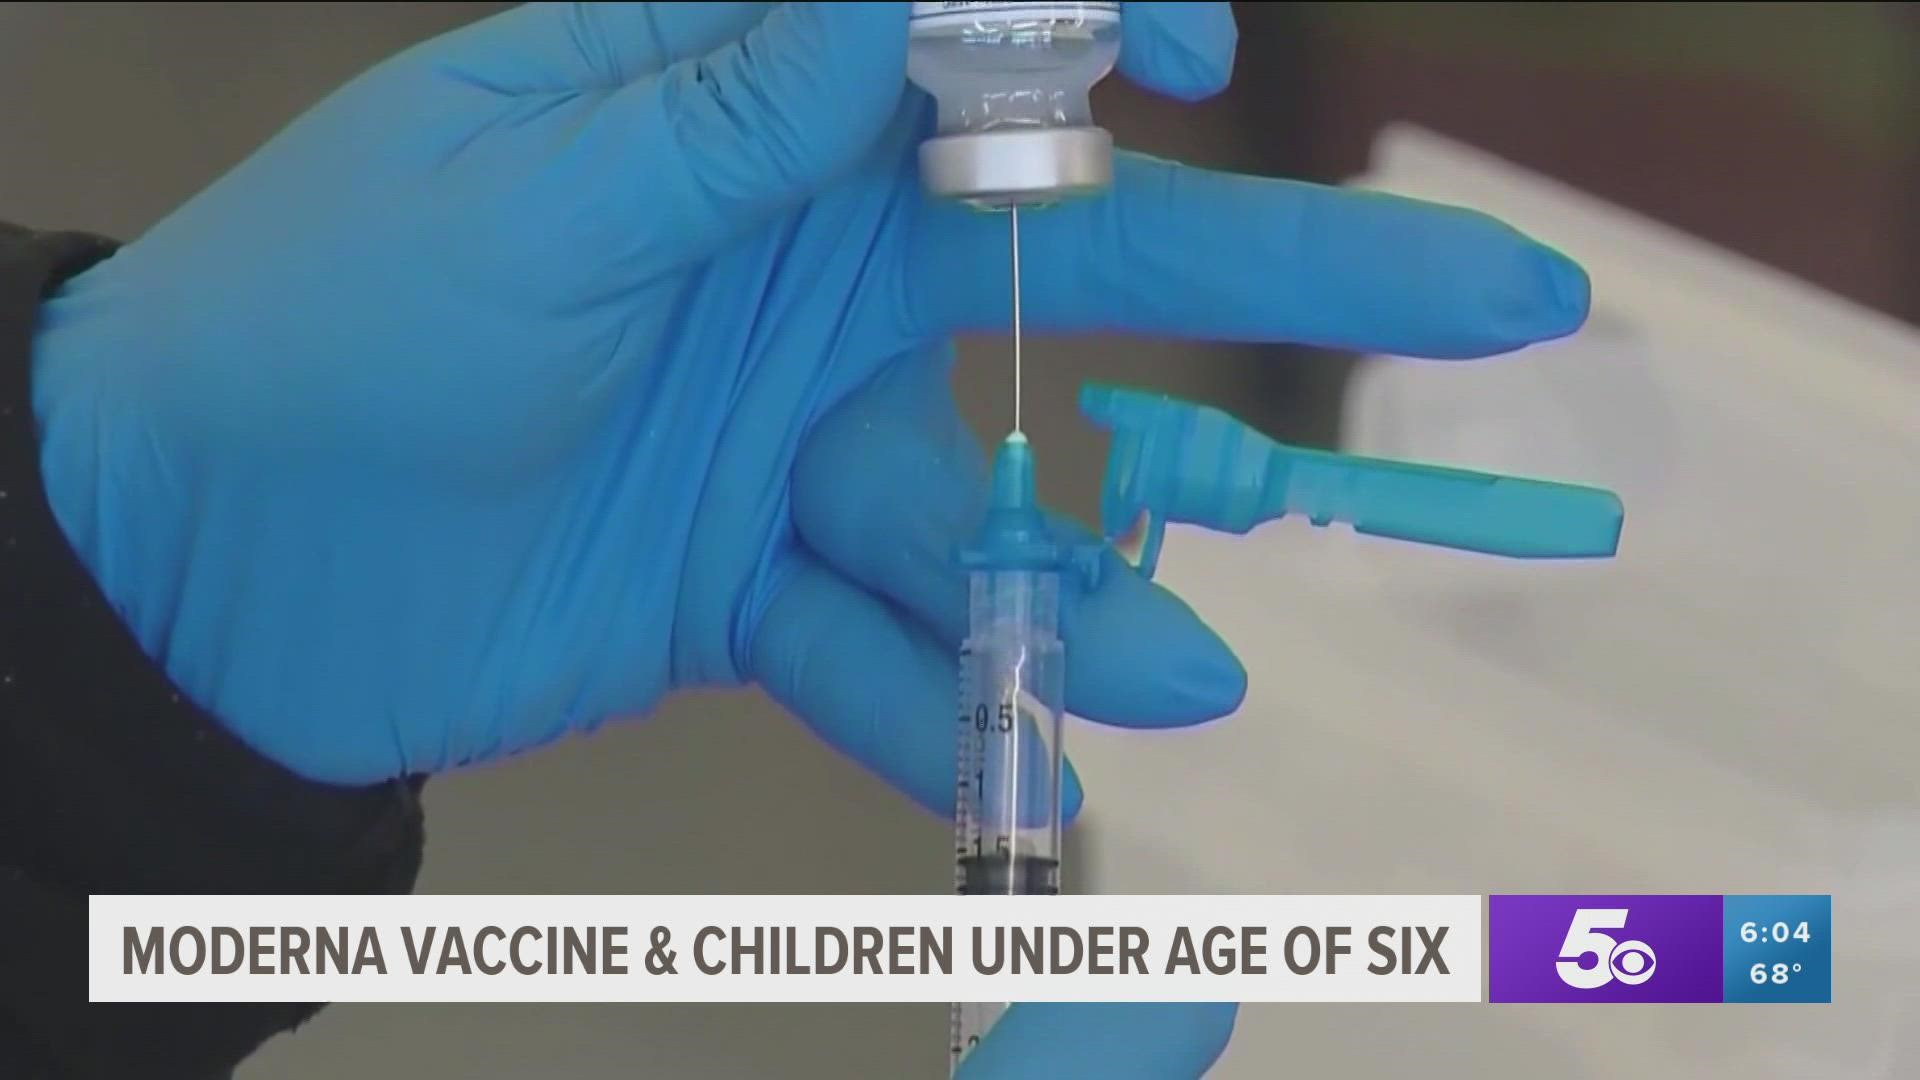 Moderna is seeking FDA approval for its modified vaccine, which will be one-fourth the strength of a regular dose, for children six months old to five-year-olds.